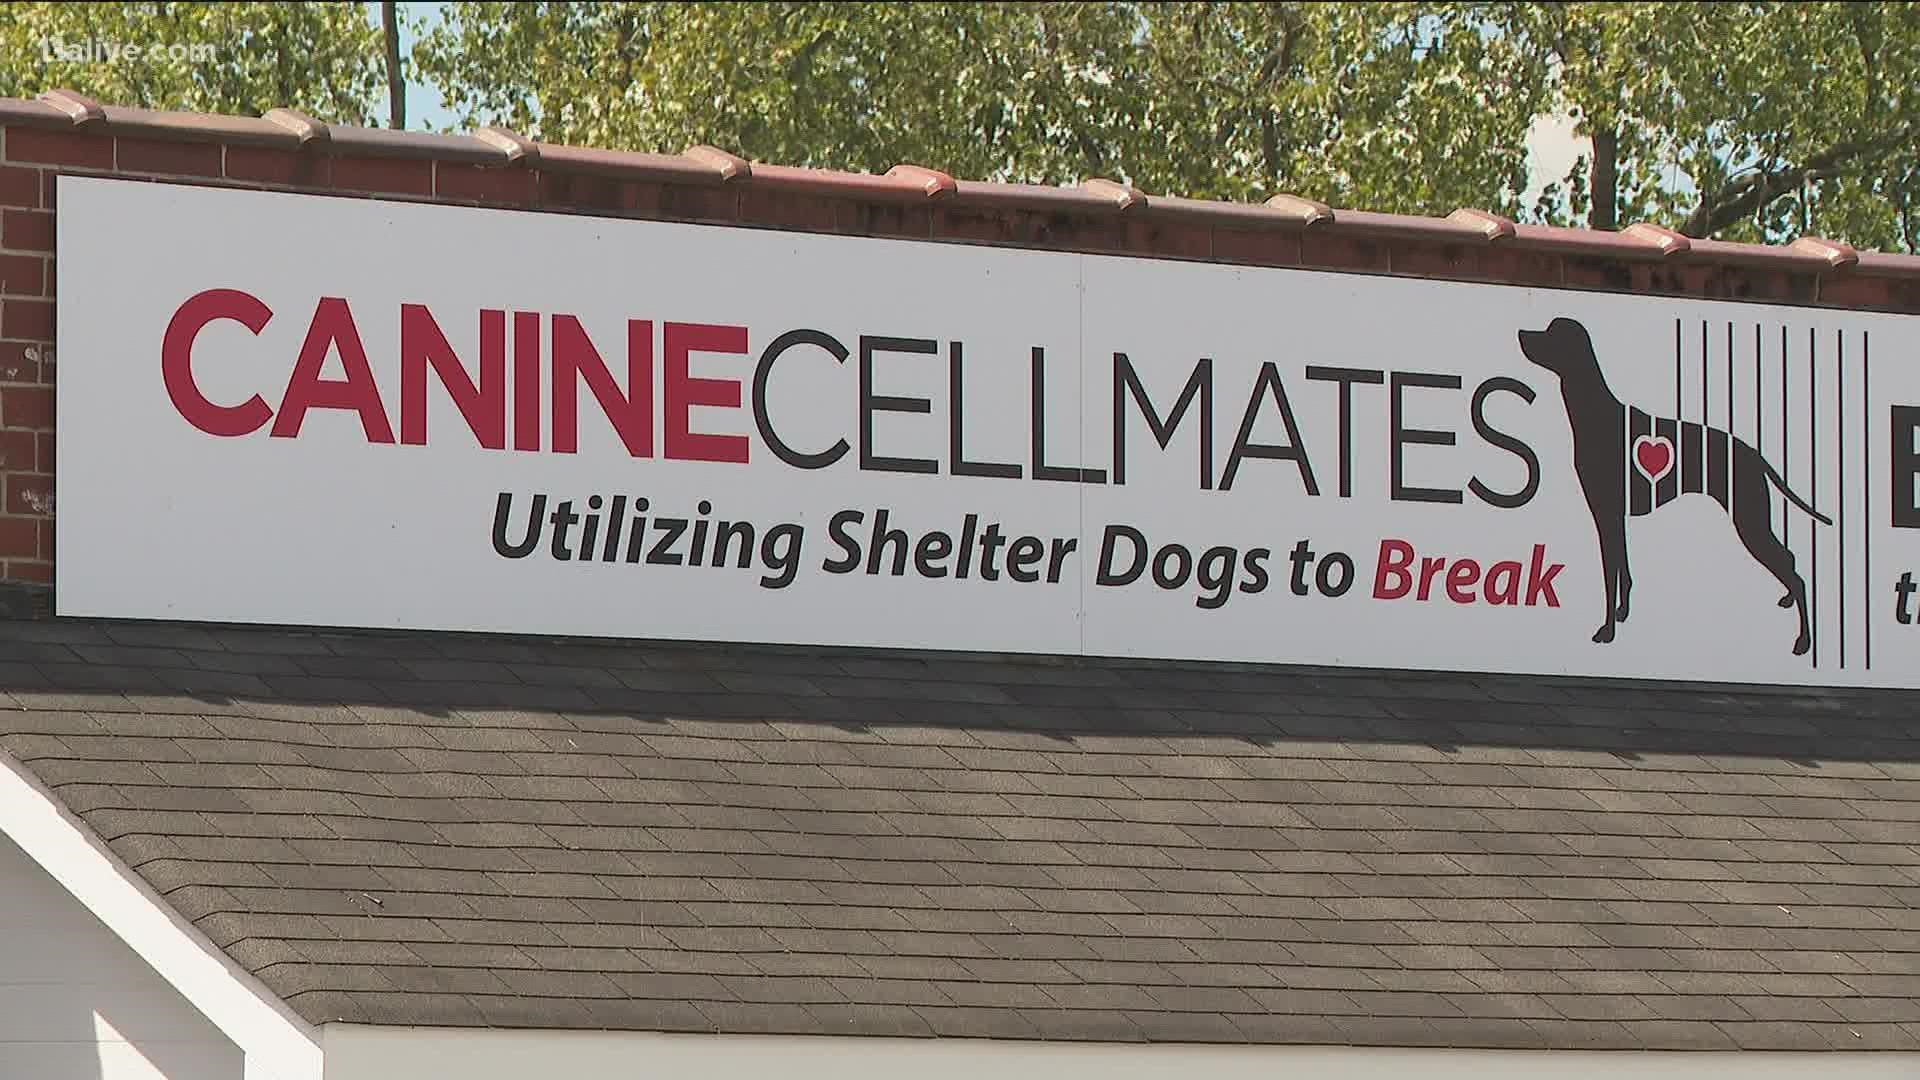 The goal of the nonprofit is to connect inmates and dogs so they can help save each other.